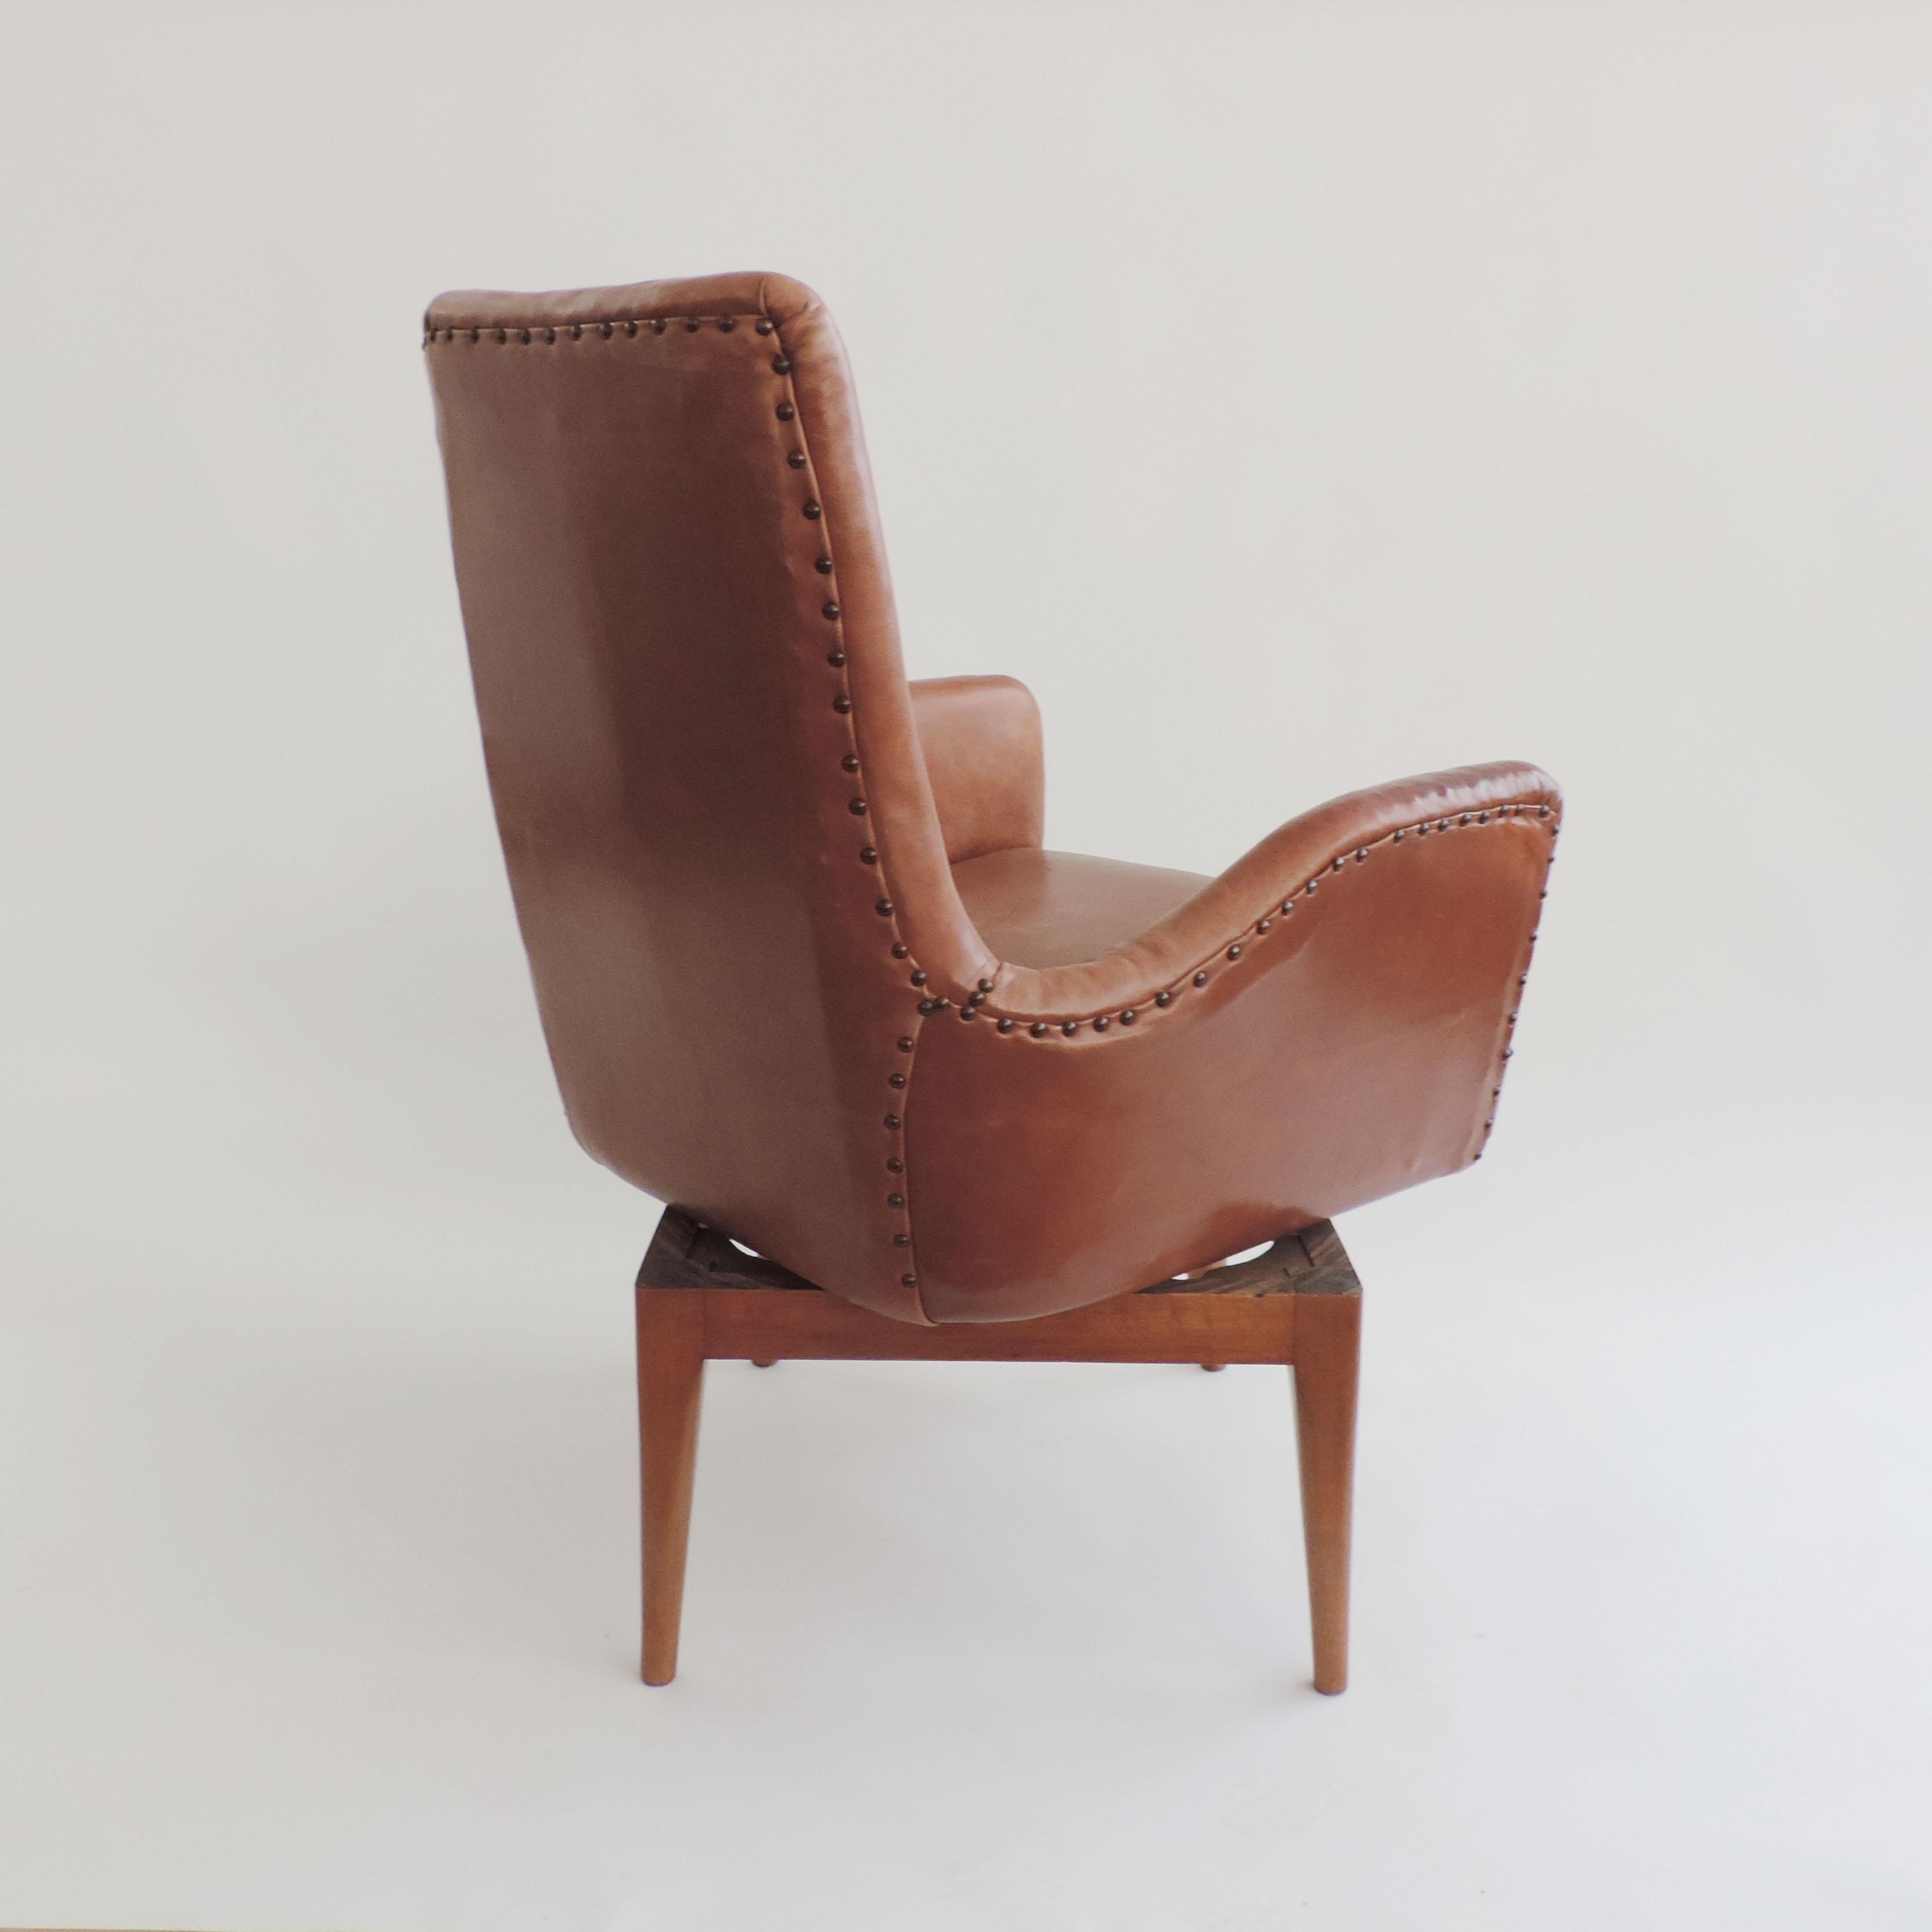 Mid-20th Century Giovanni Gariboldi Swivel Chair in Leather and Wood, Italy, 1940s For Sale